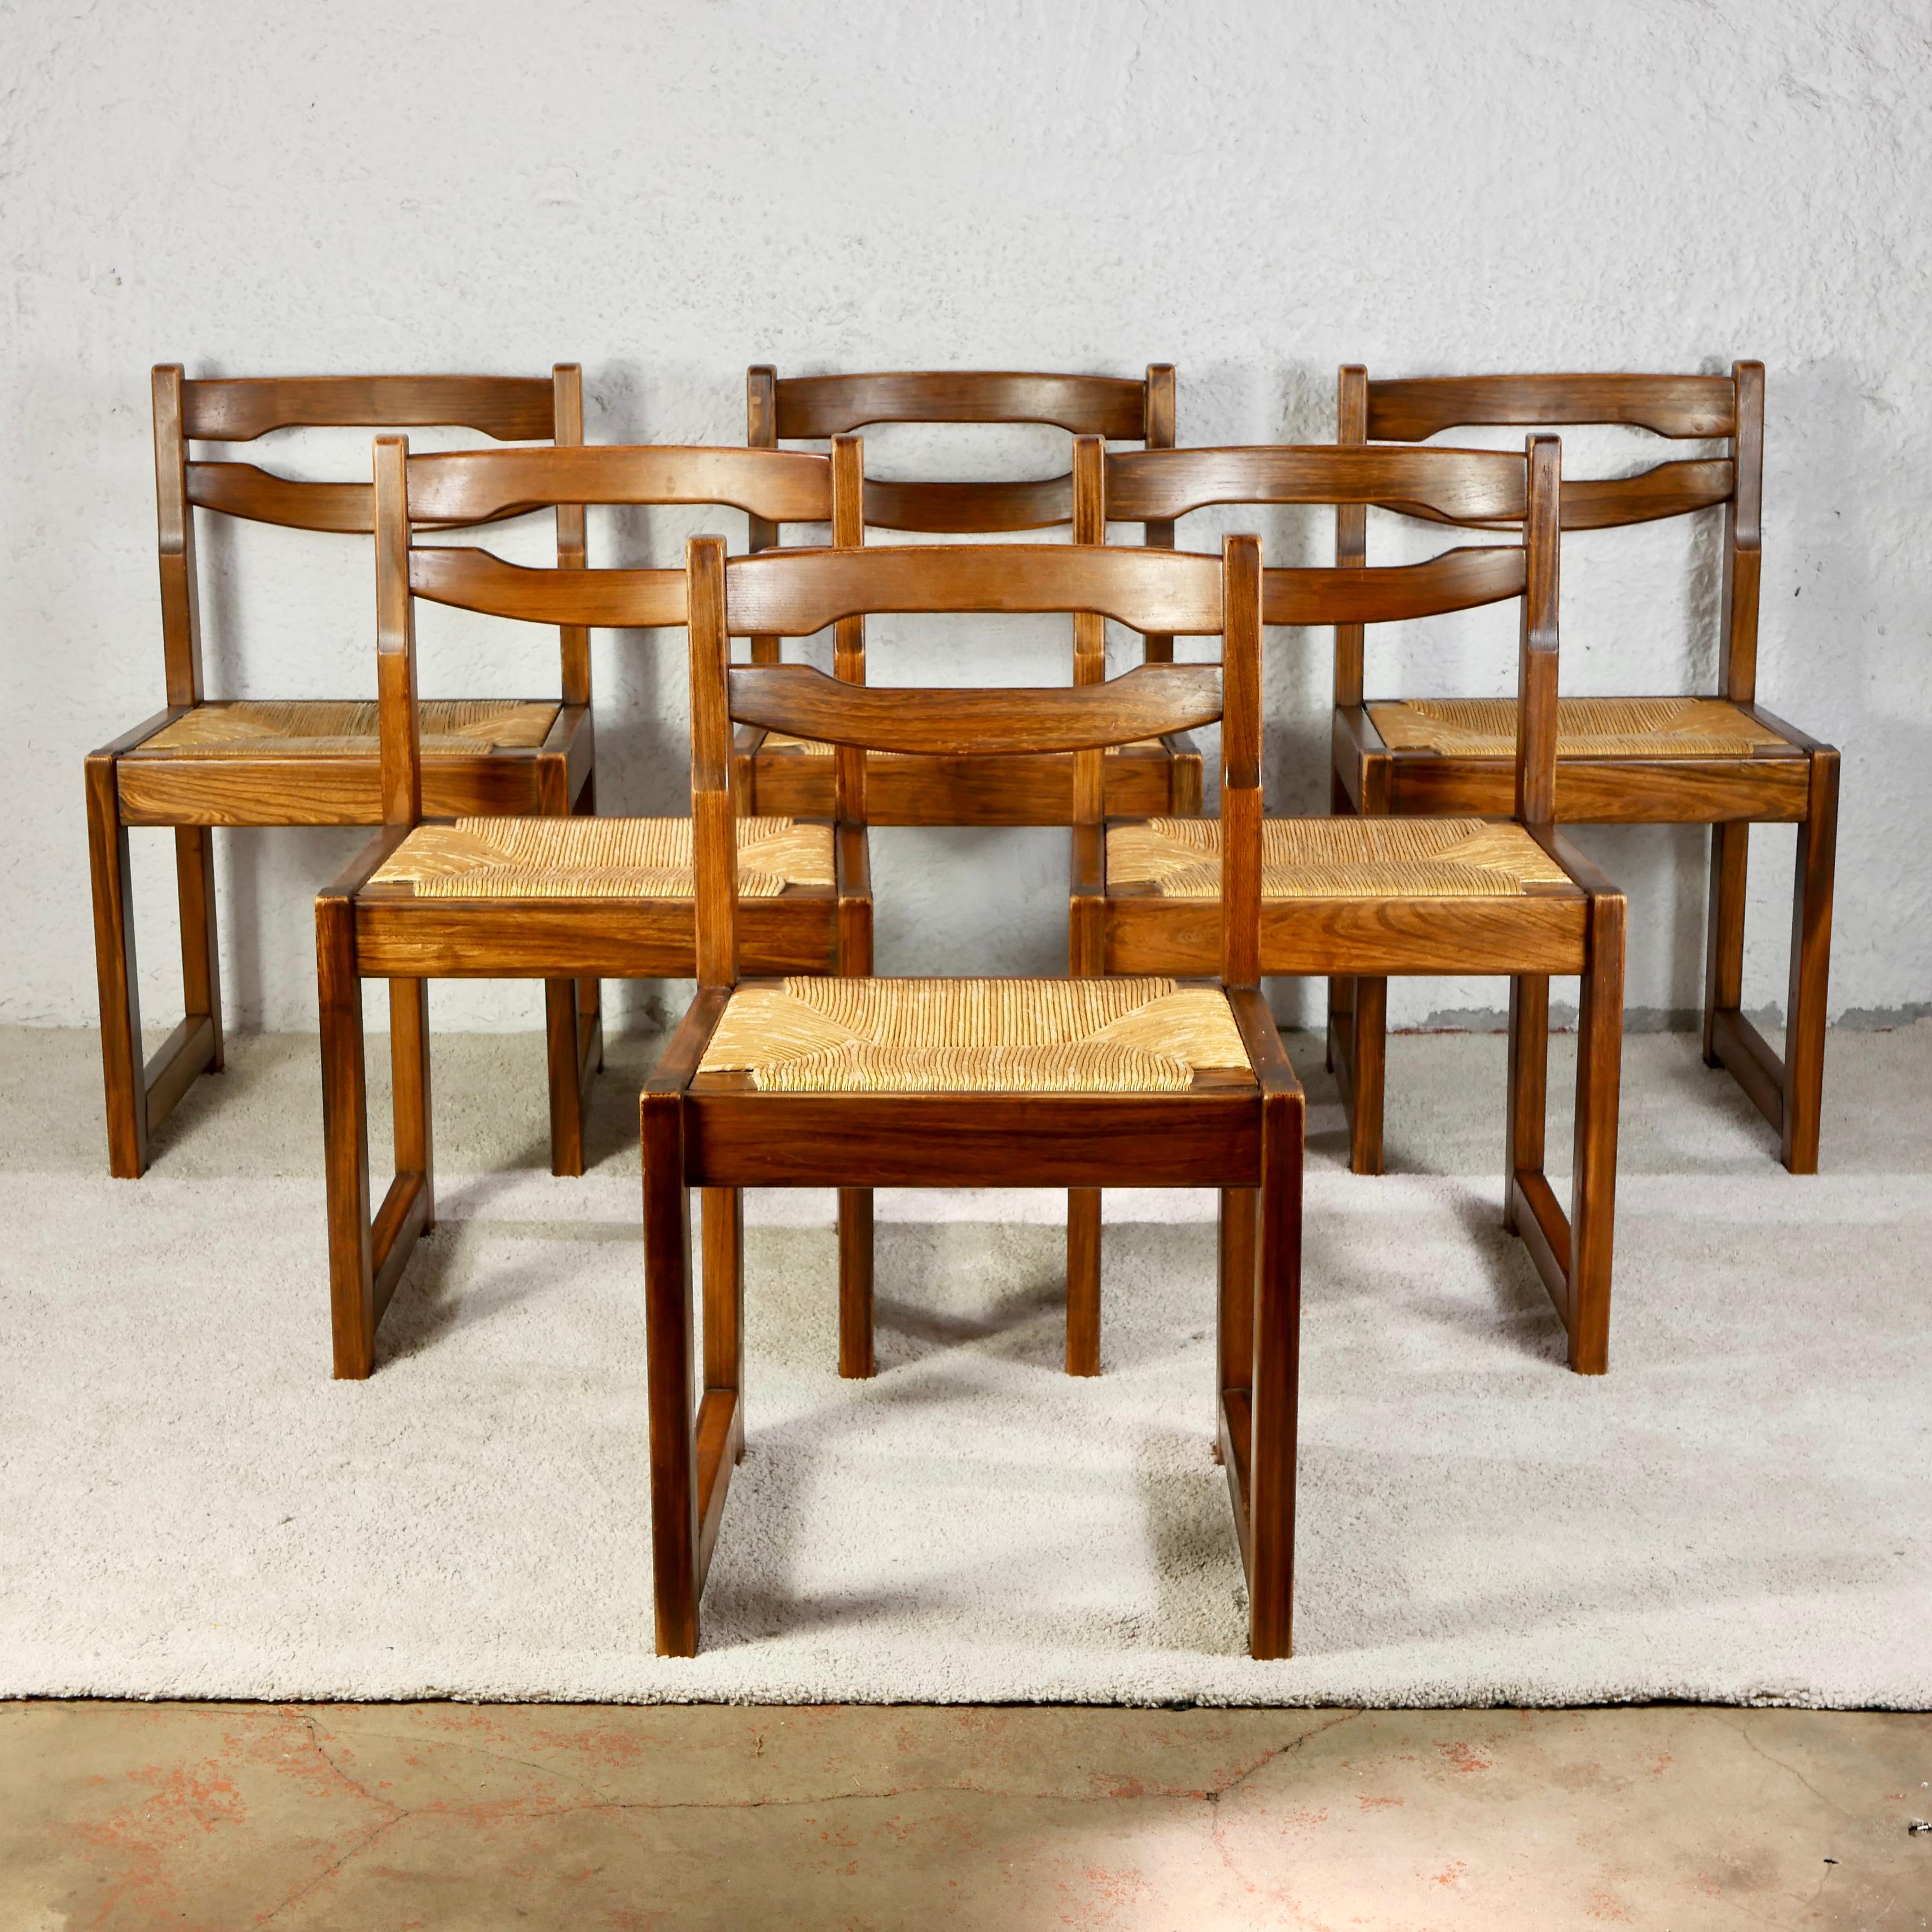 Brutalist Set of 6 brutalist chairs in solid elm by Maison Regain, 1970s, France